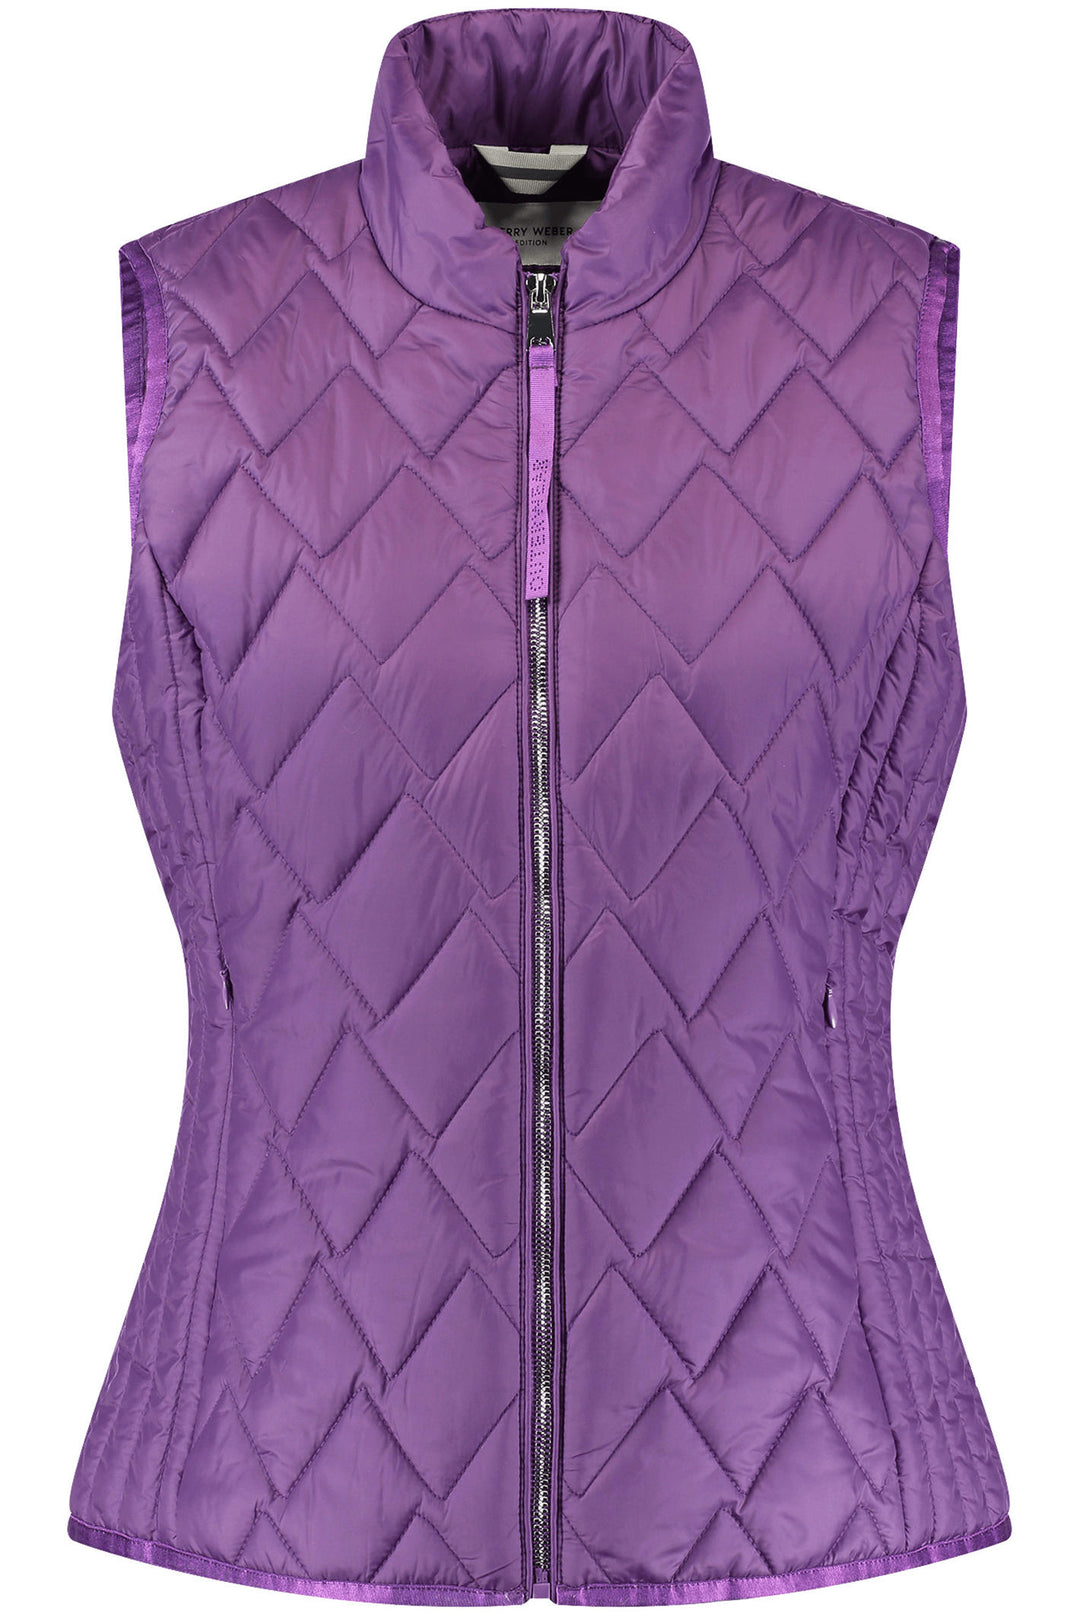 Gerry Weber 945005 Violet Padded Gilet - Experience Boutique